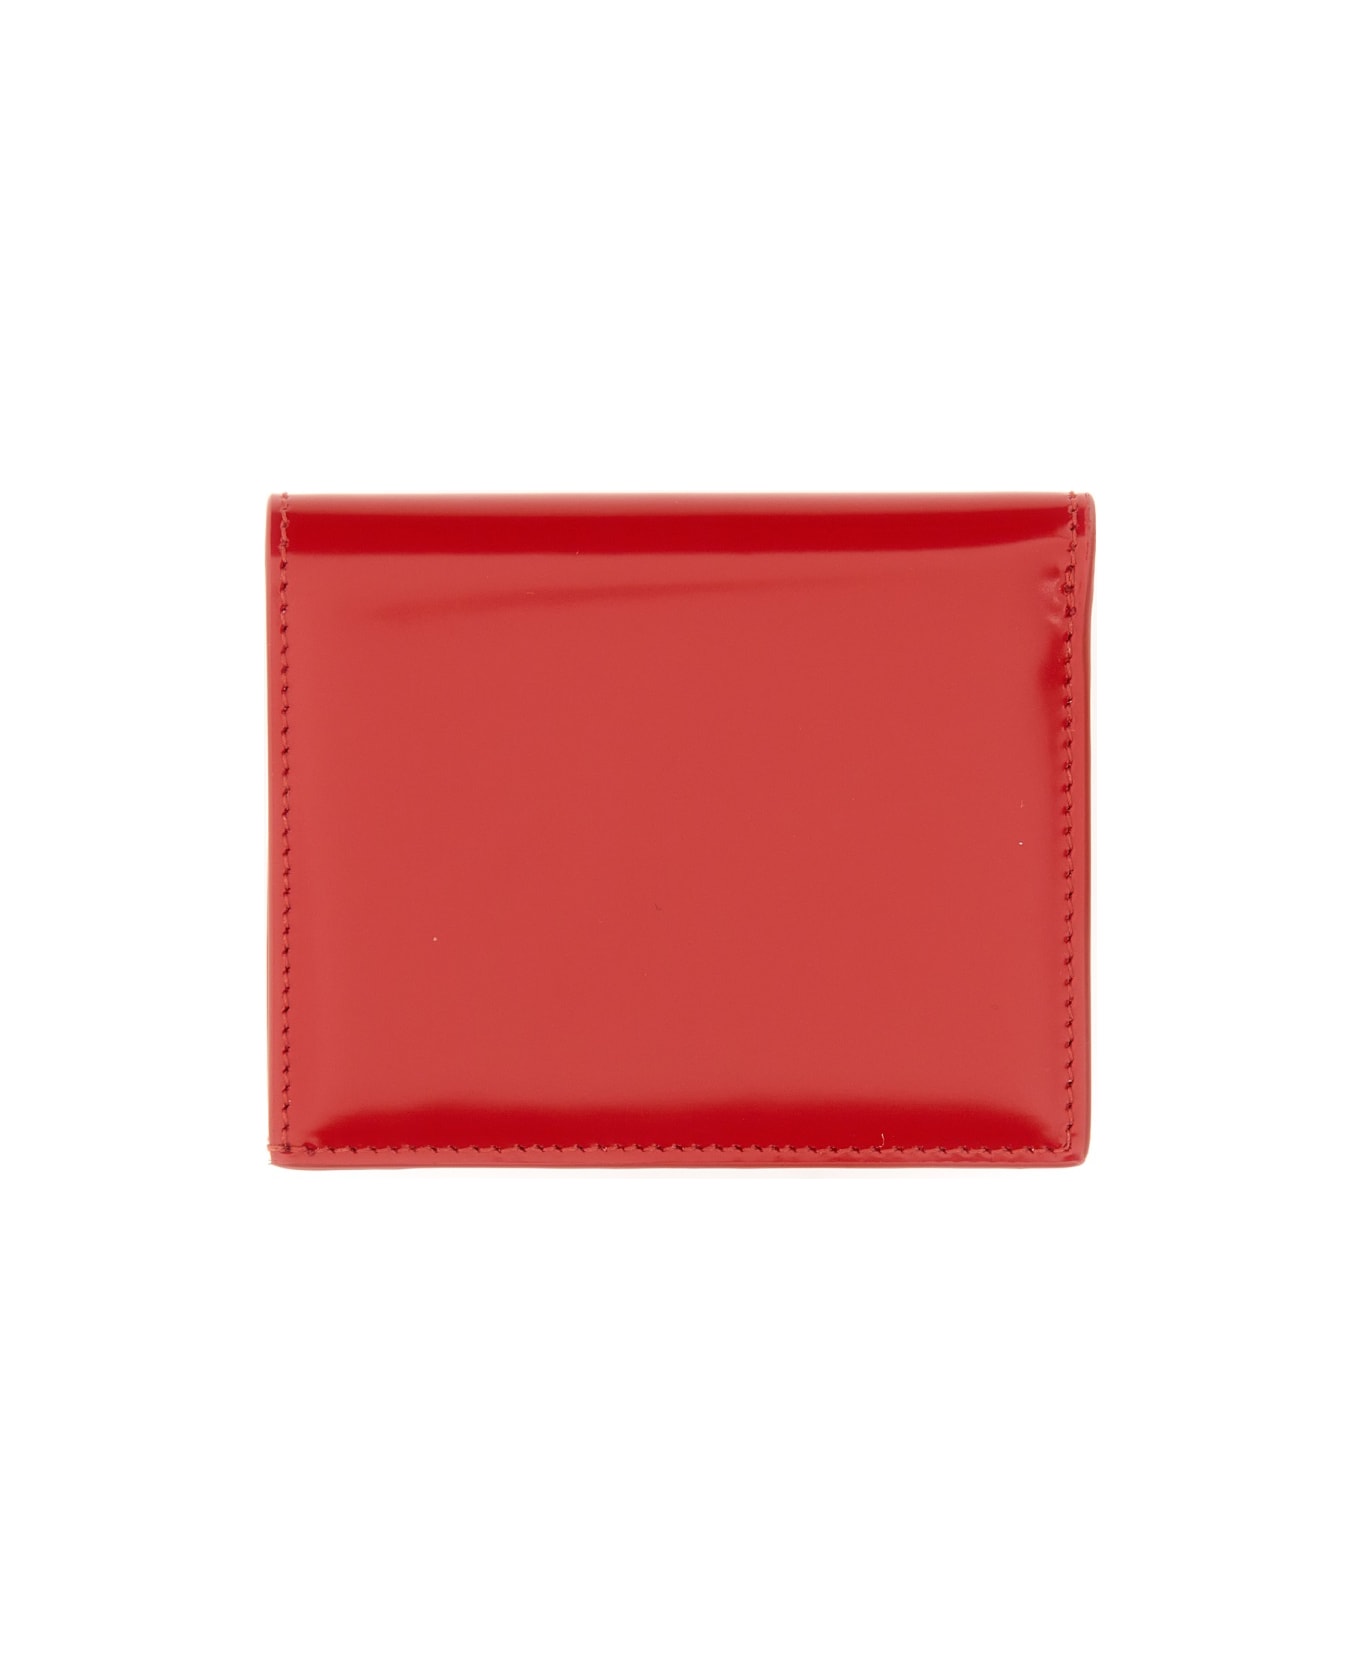 Ferragamo Compact Wallet With Hook-and-eye Closure - RED